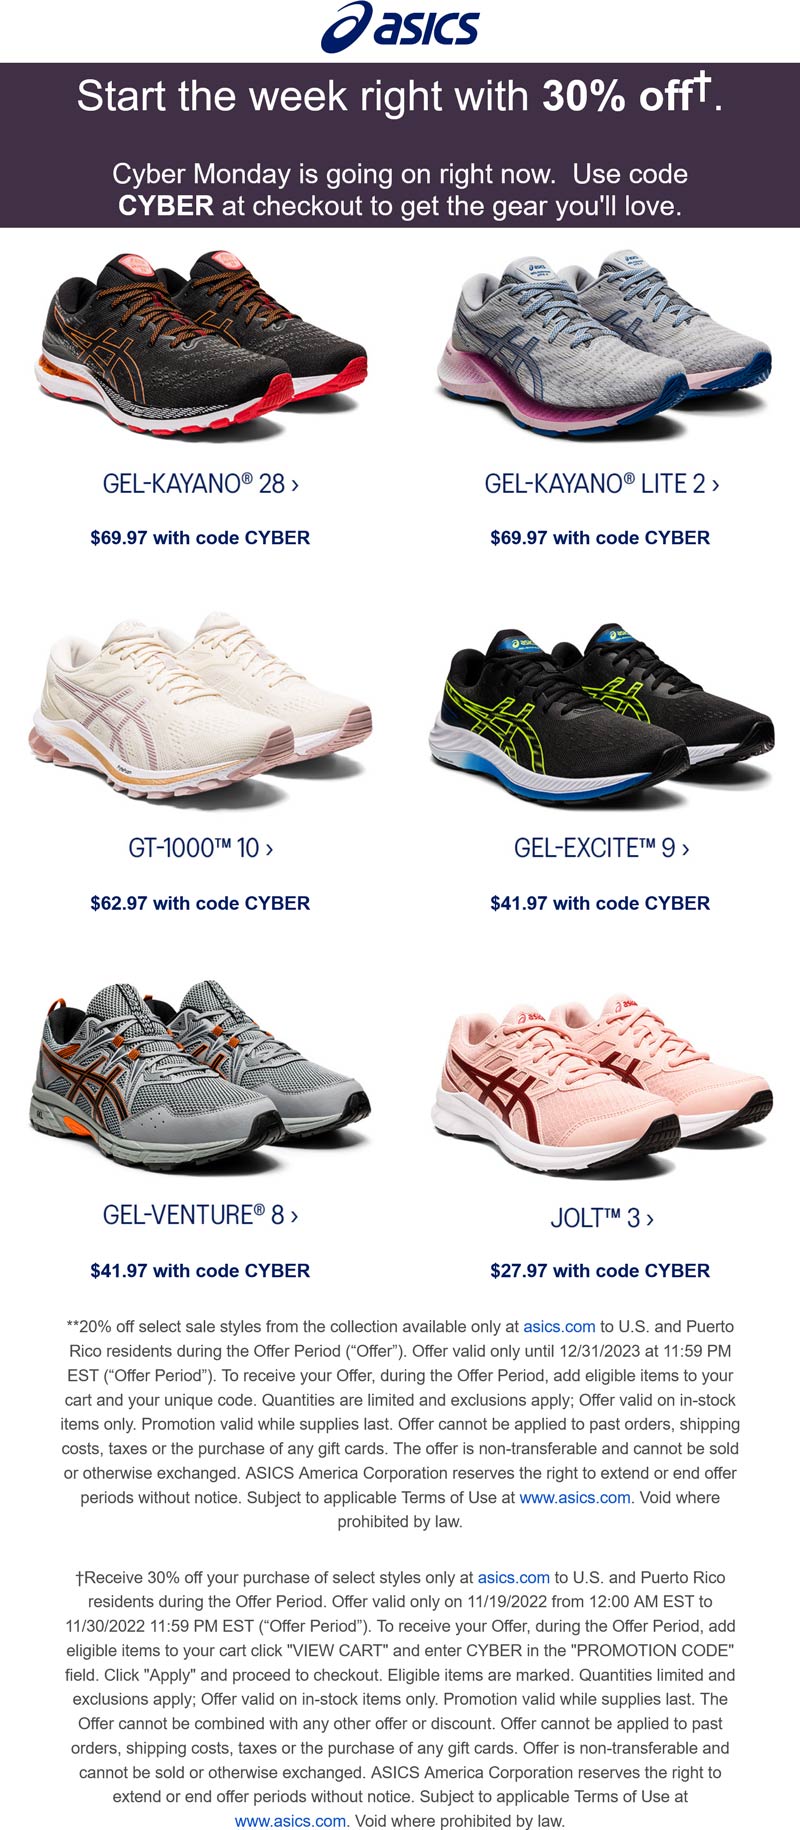 Asics stores Coupon  30% off today at Asics shoes via promo code CYBER #asics 